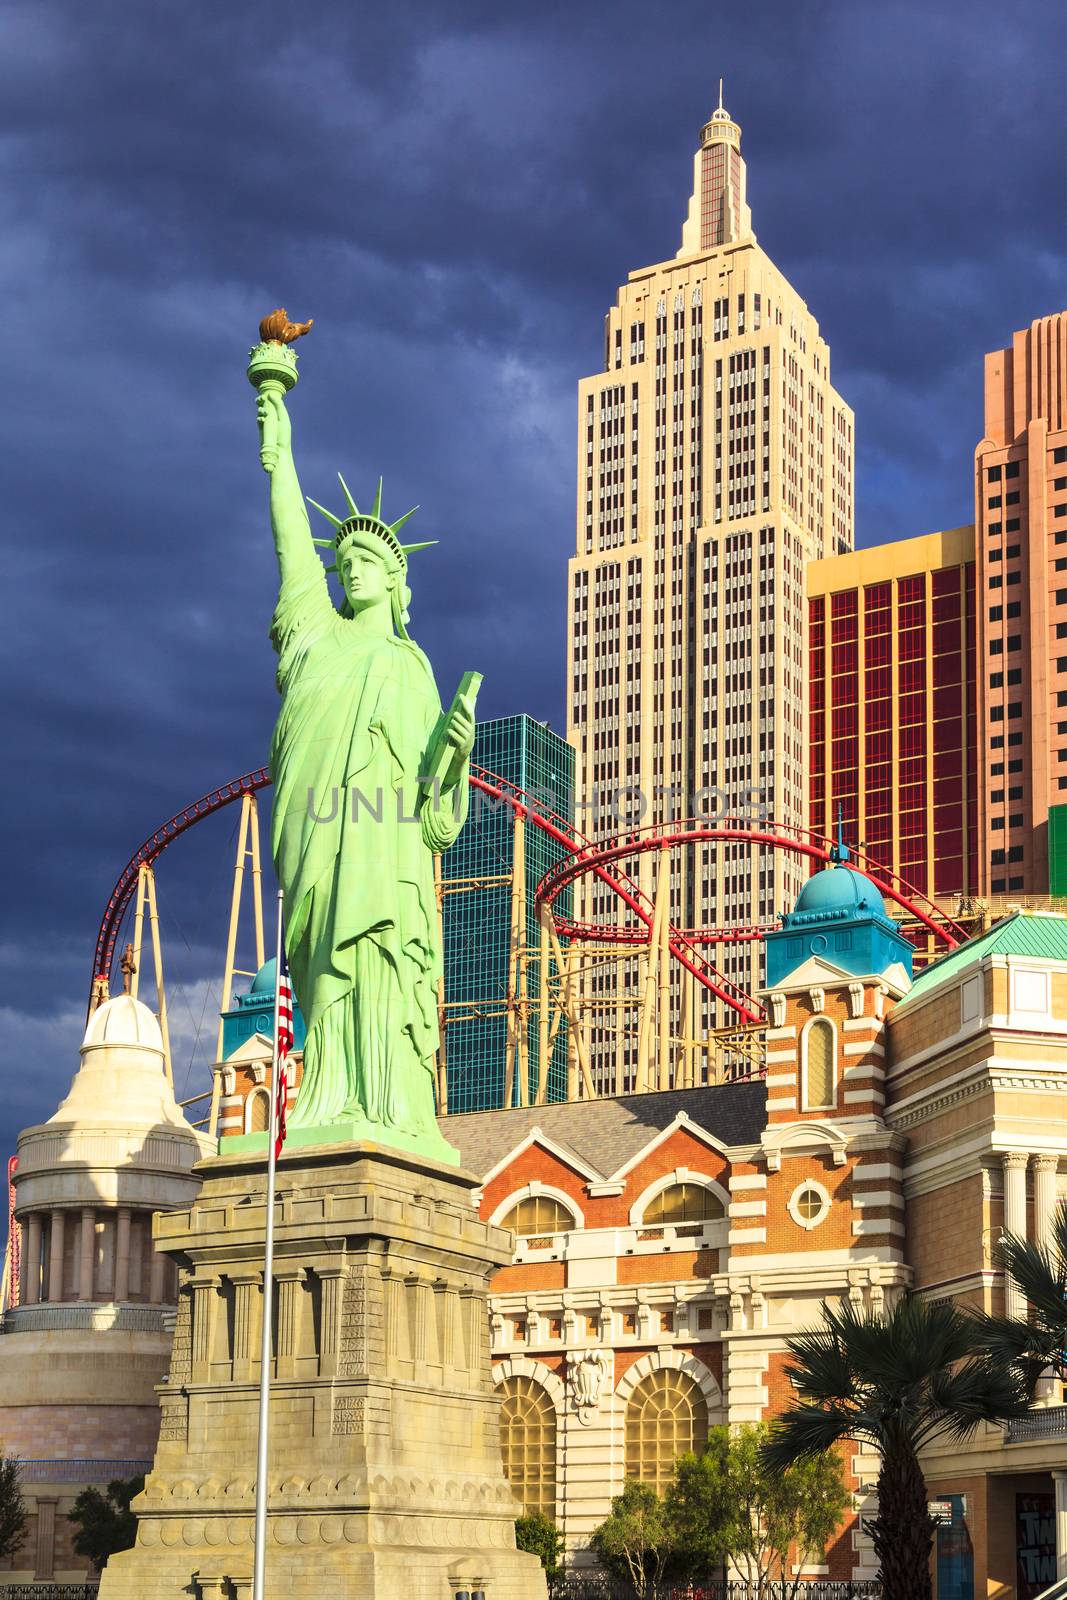 Las Vegas Nevada USA - JUN 9 2015: New York-New York Casino and Hotel architecture facade features many of the New York City icons in Las Vegas, About 40 million people visiting the city each year.